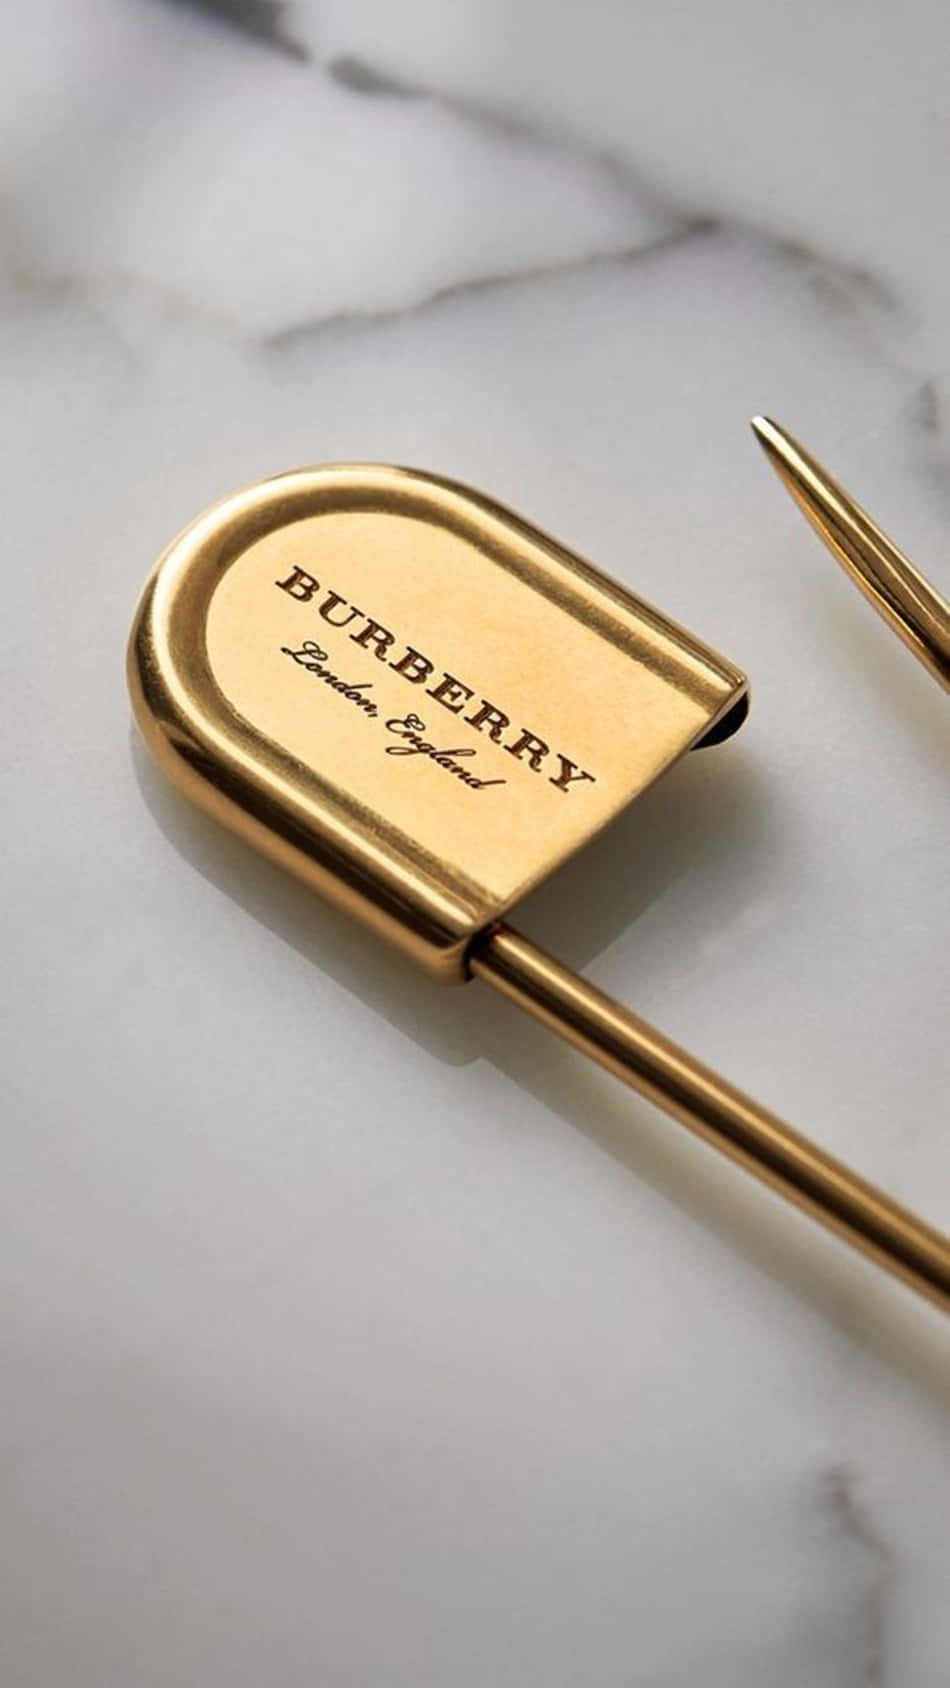 Luxury Aesthetic Burberry Safety Pin Wallpaper